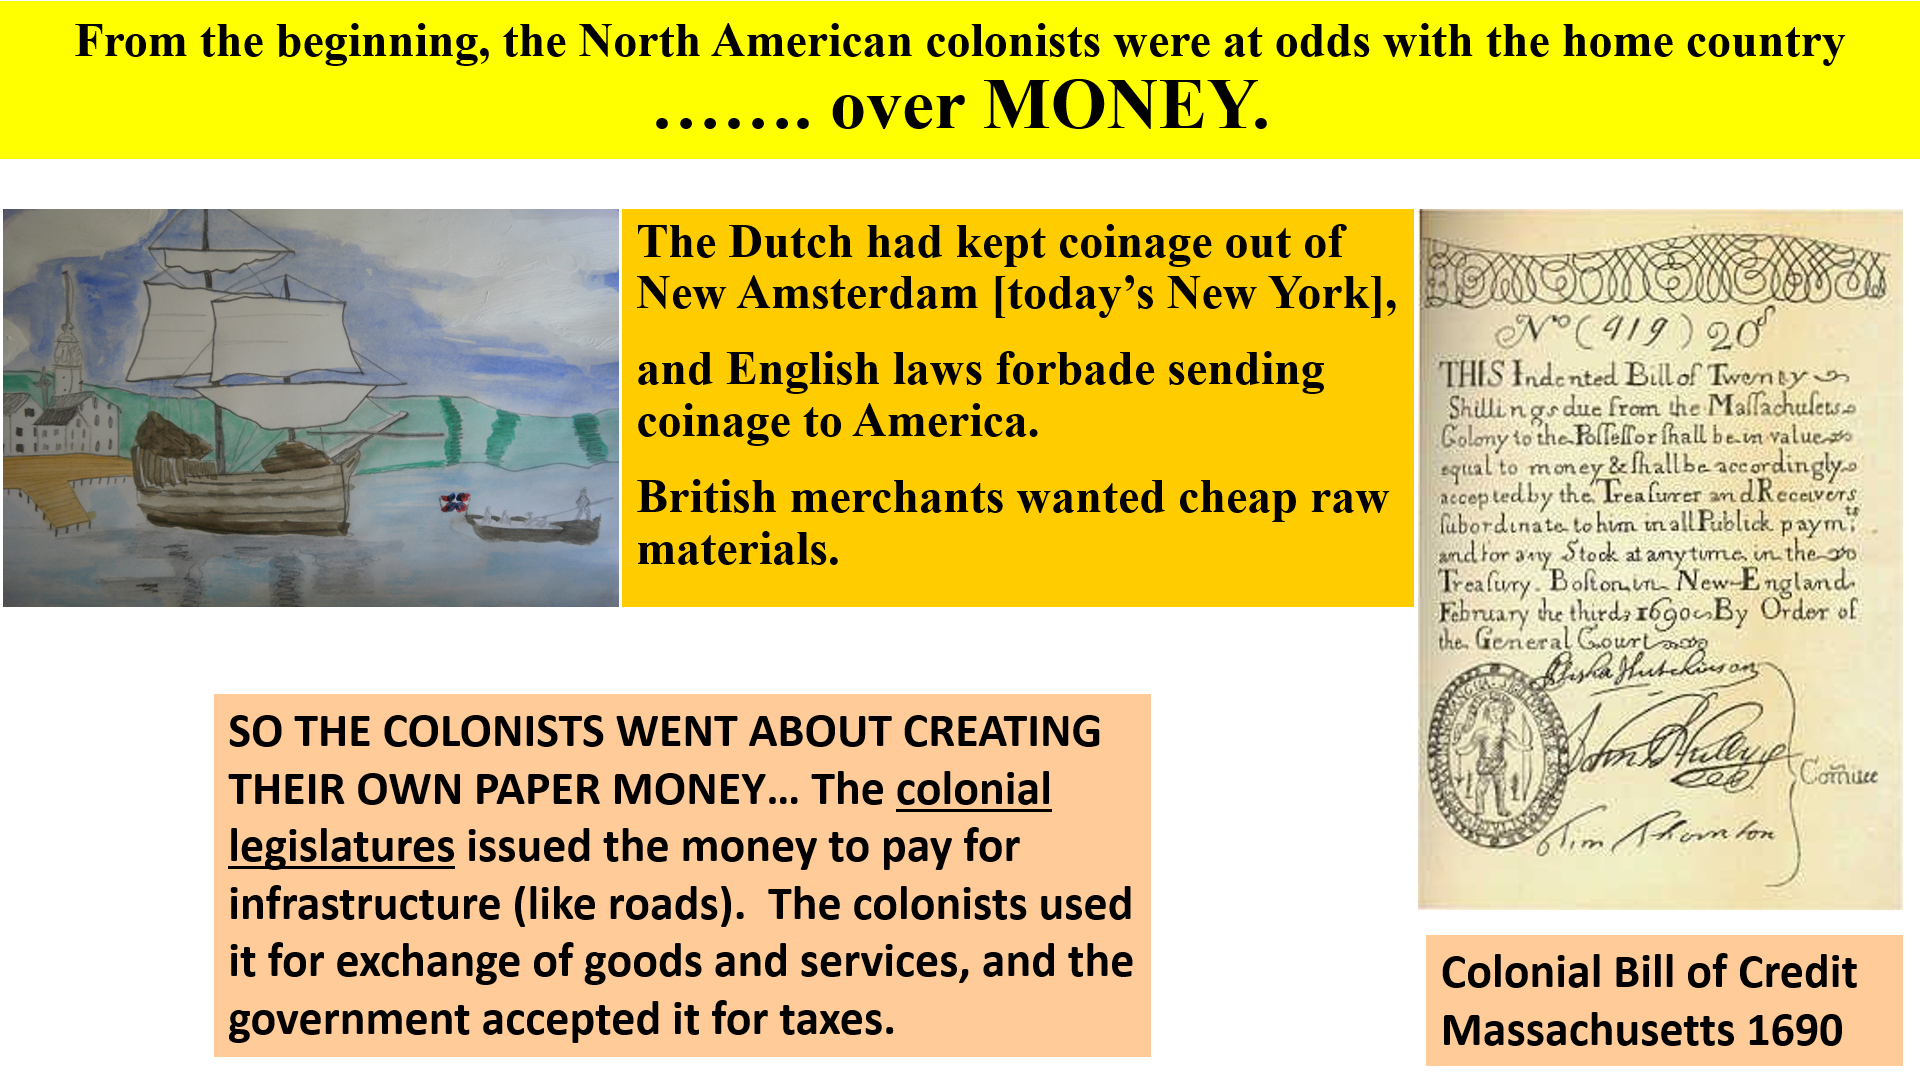 Colonists create their own money